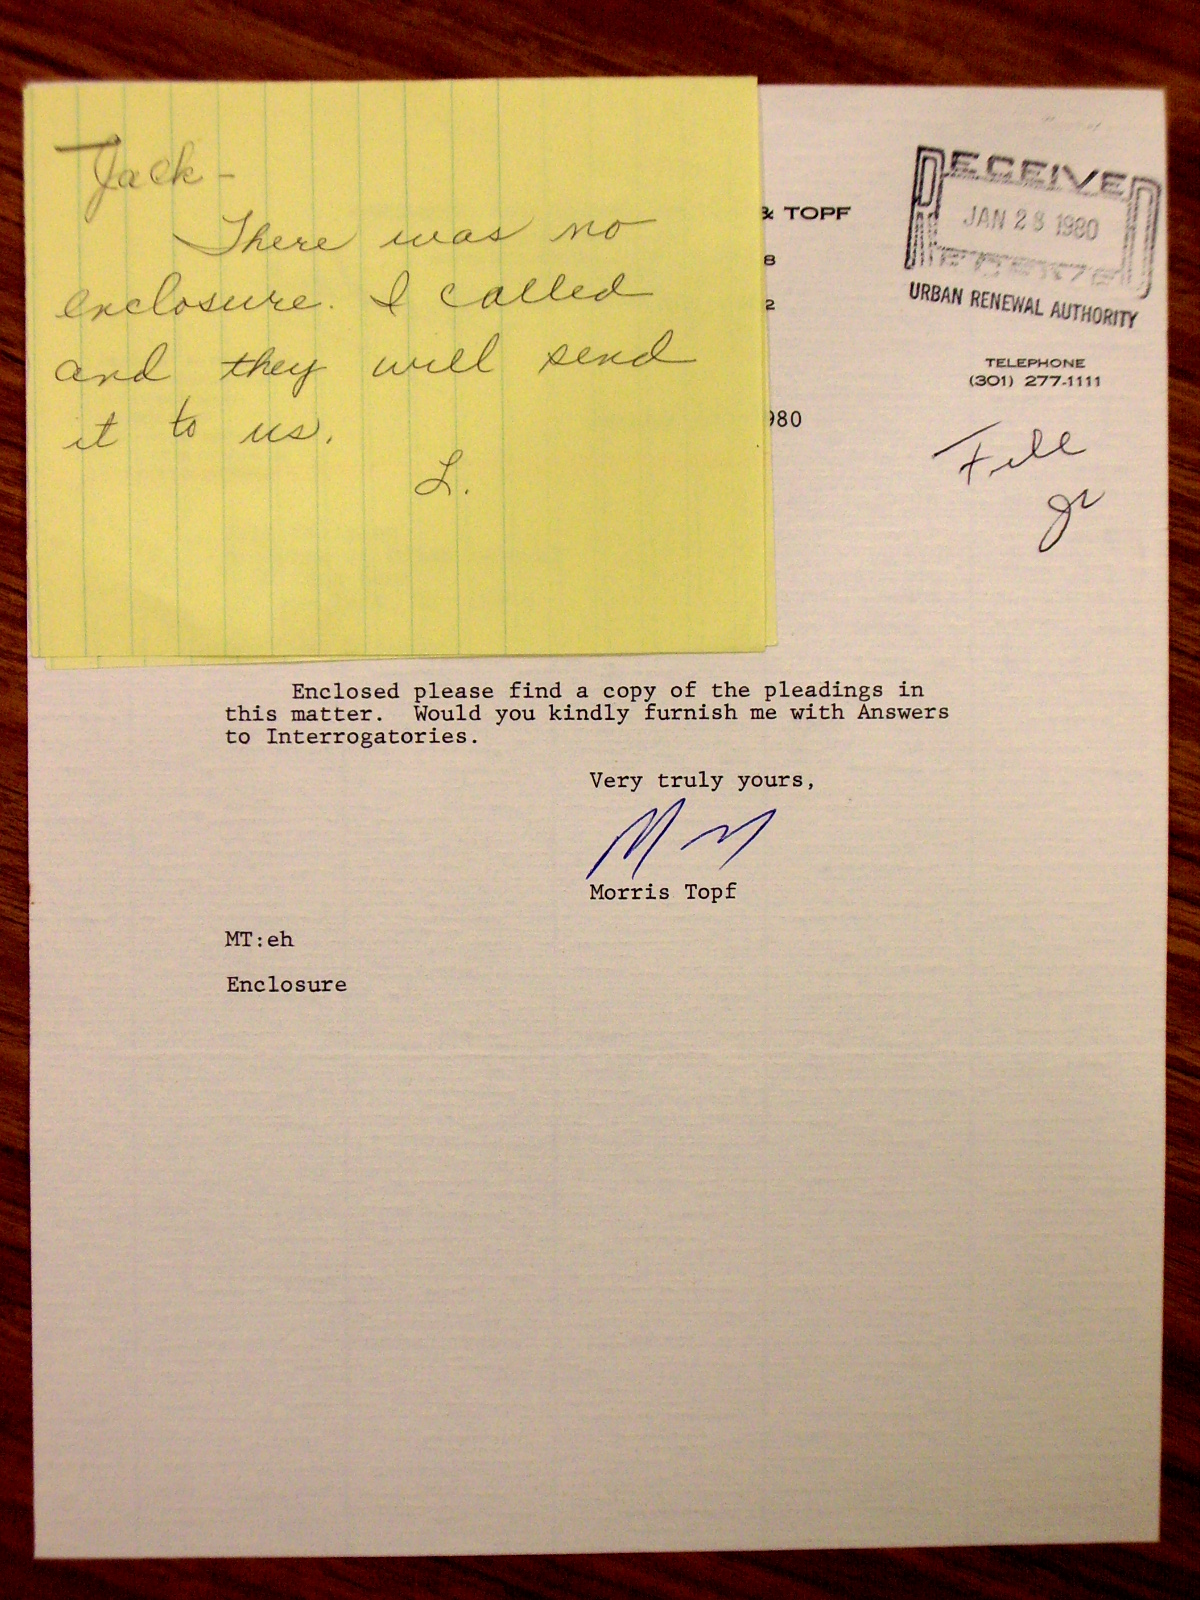 Letter to Jack Callahan from Morris Topf with Hand written note about lack of enclosure